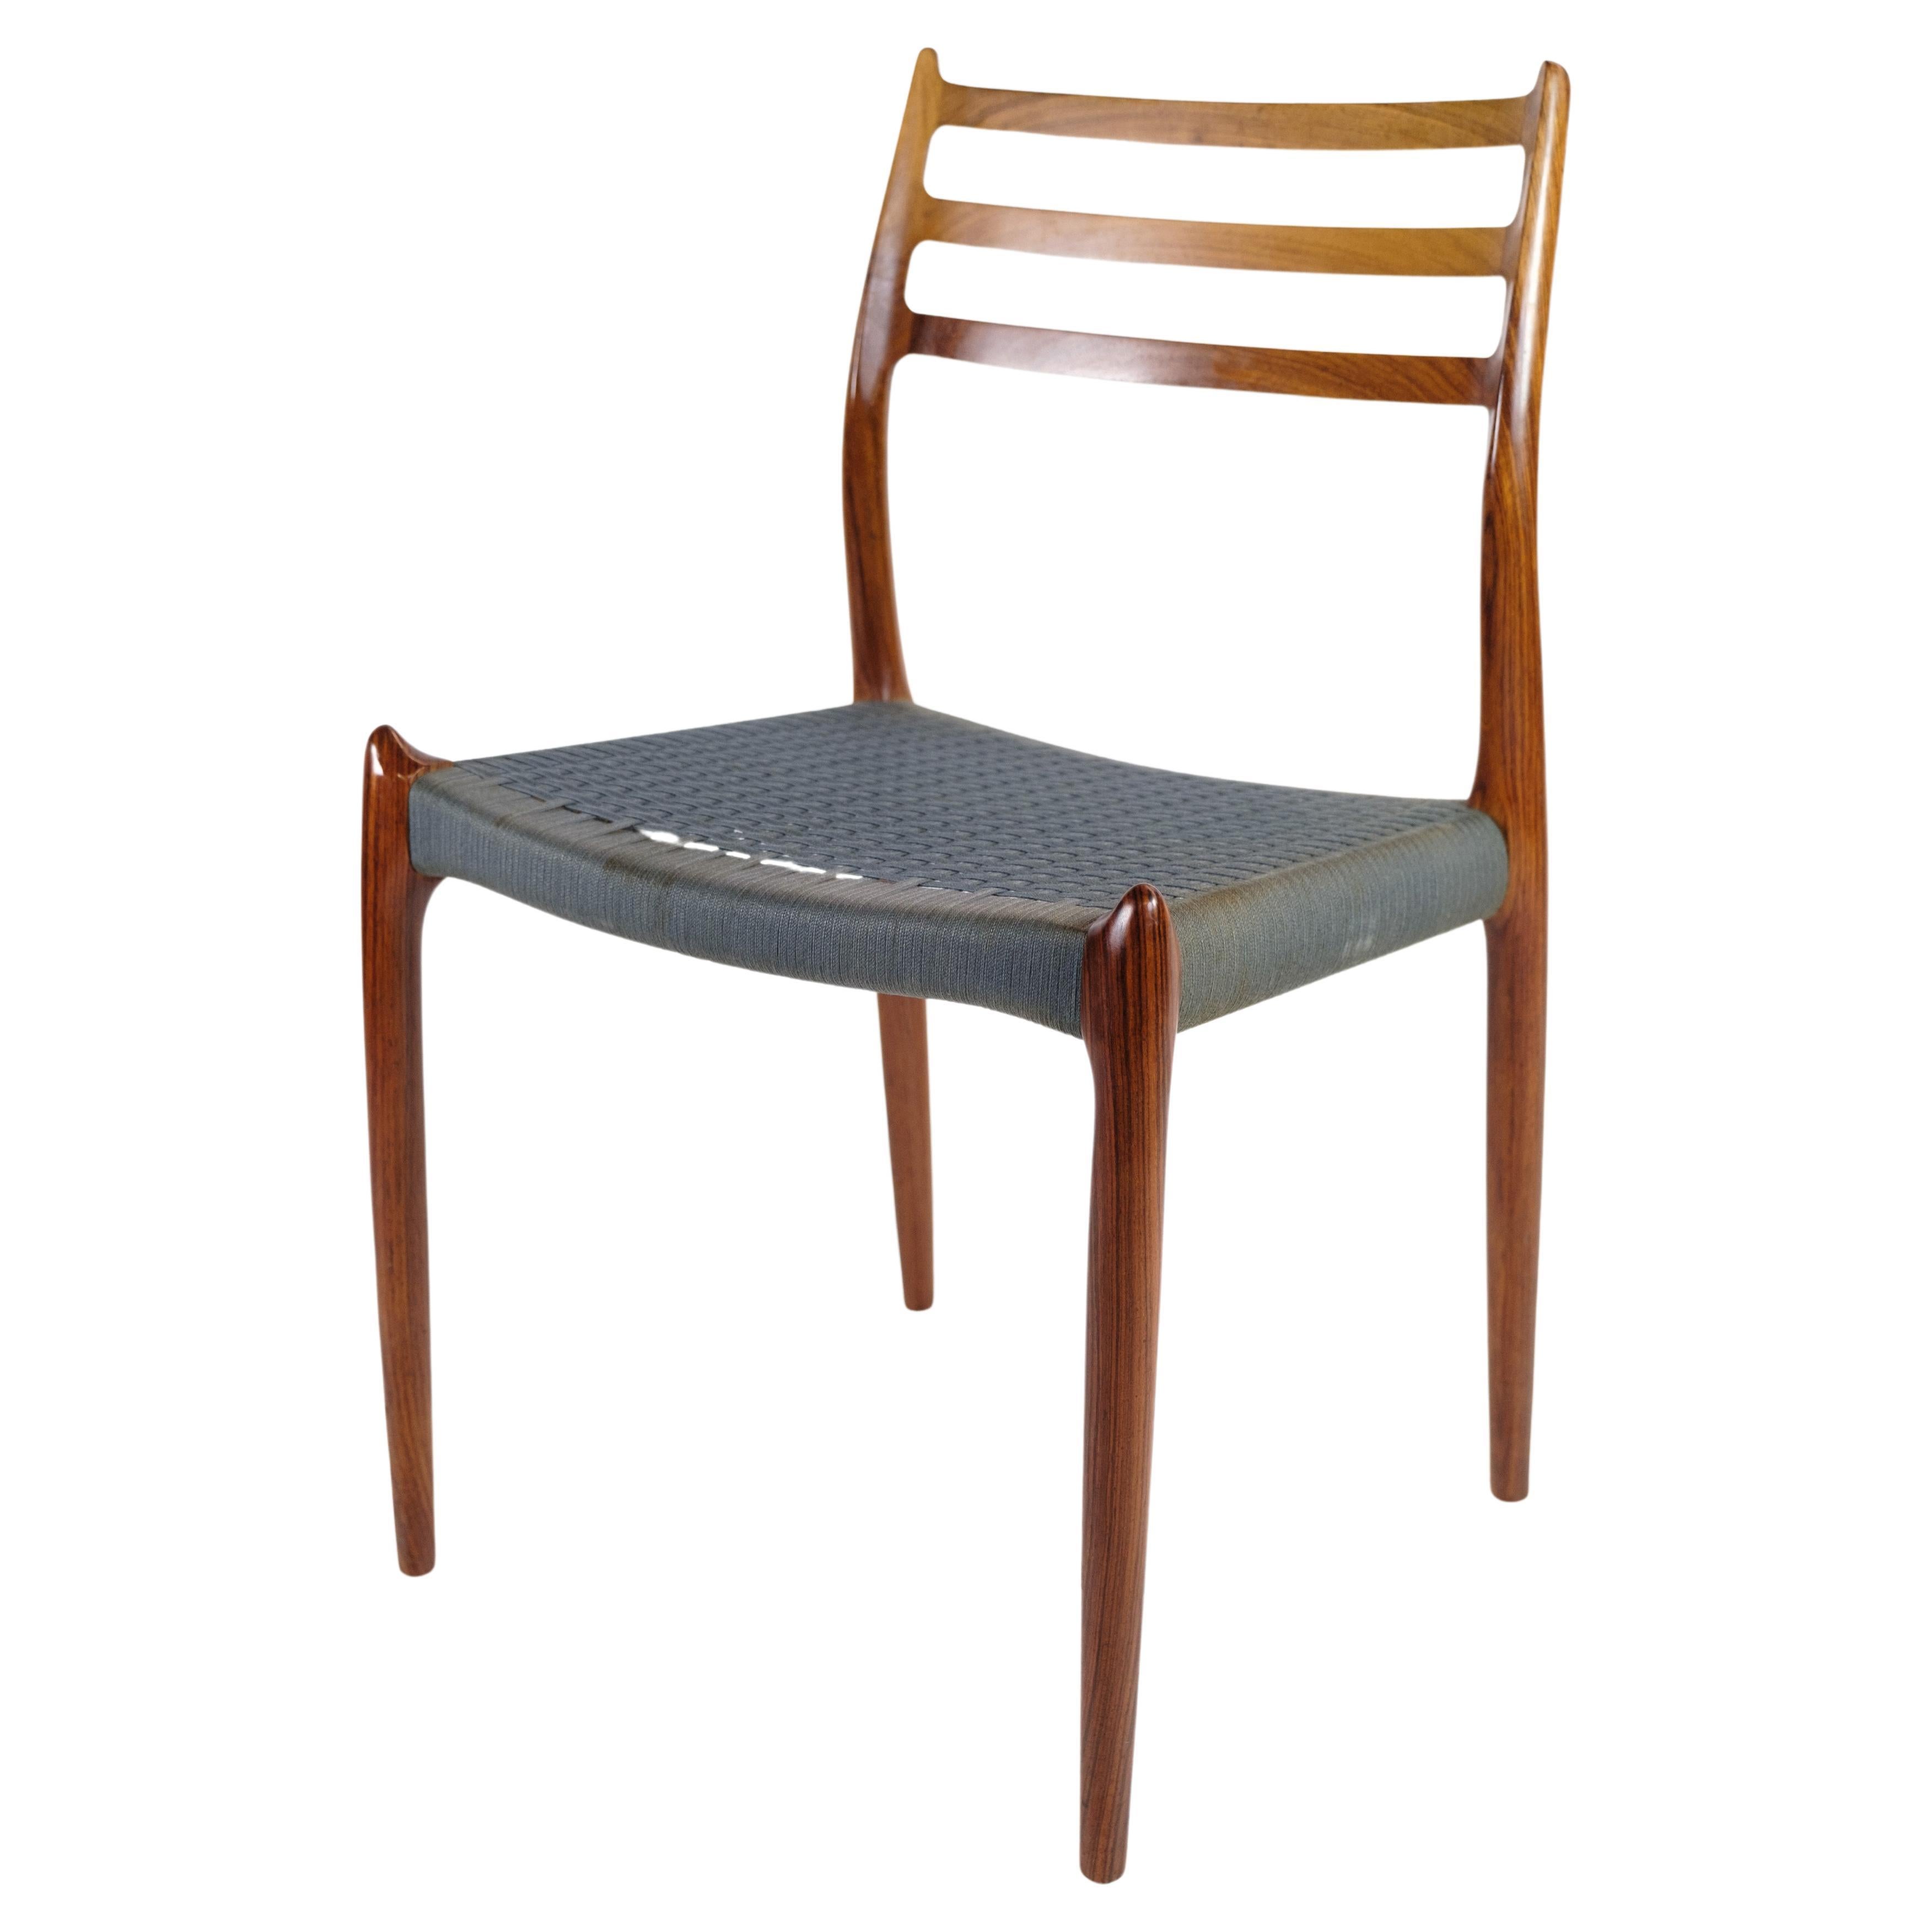 8 Dining Room Chairs Model No 78 Made In Rosewood By Niels O. Møller From 1960s